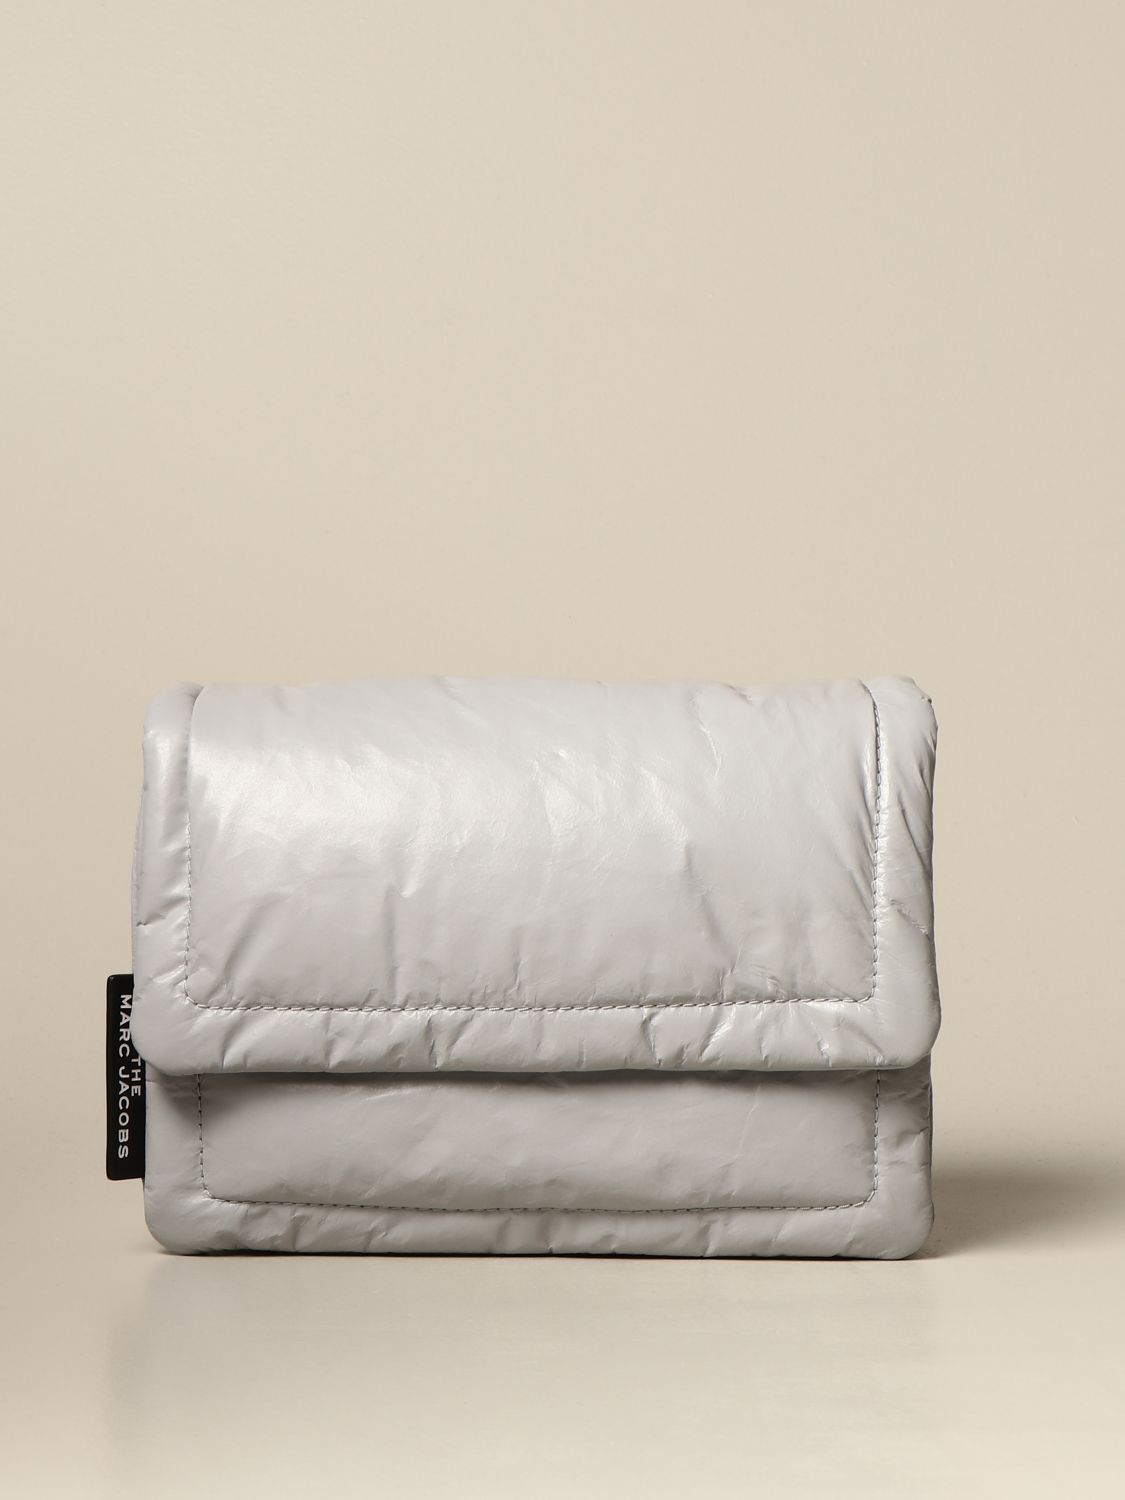 MARC JACOBS: The Pillow bag in ultralight leather - Grey